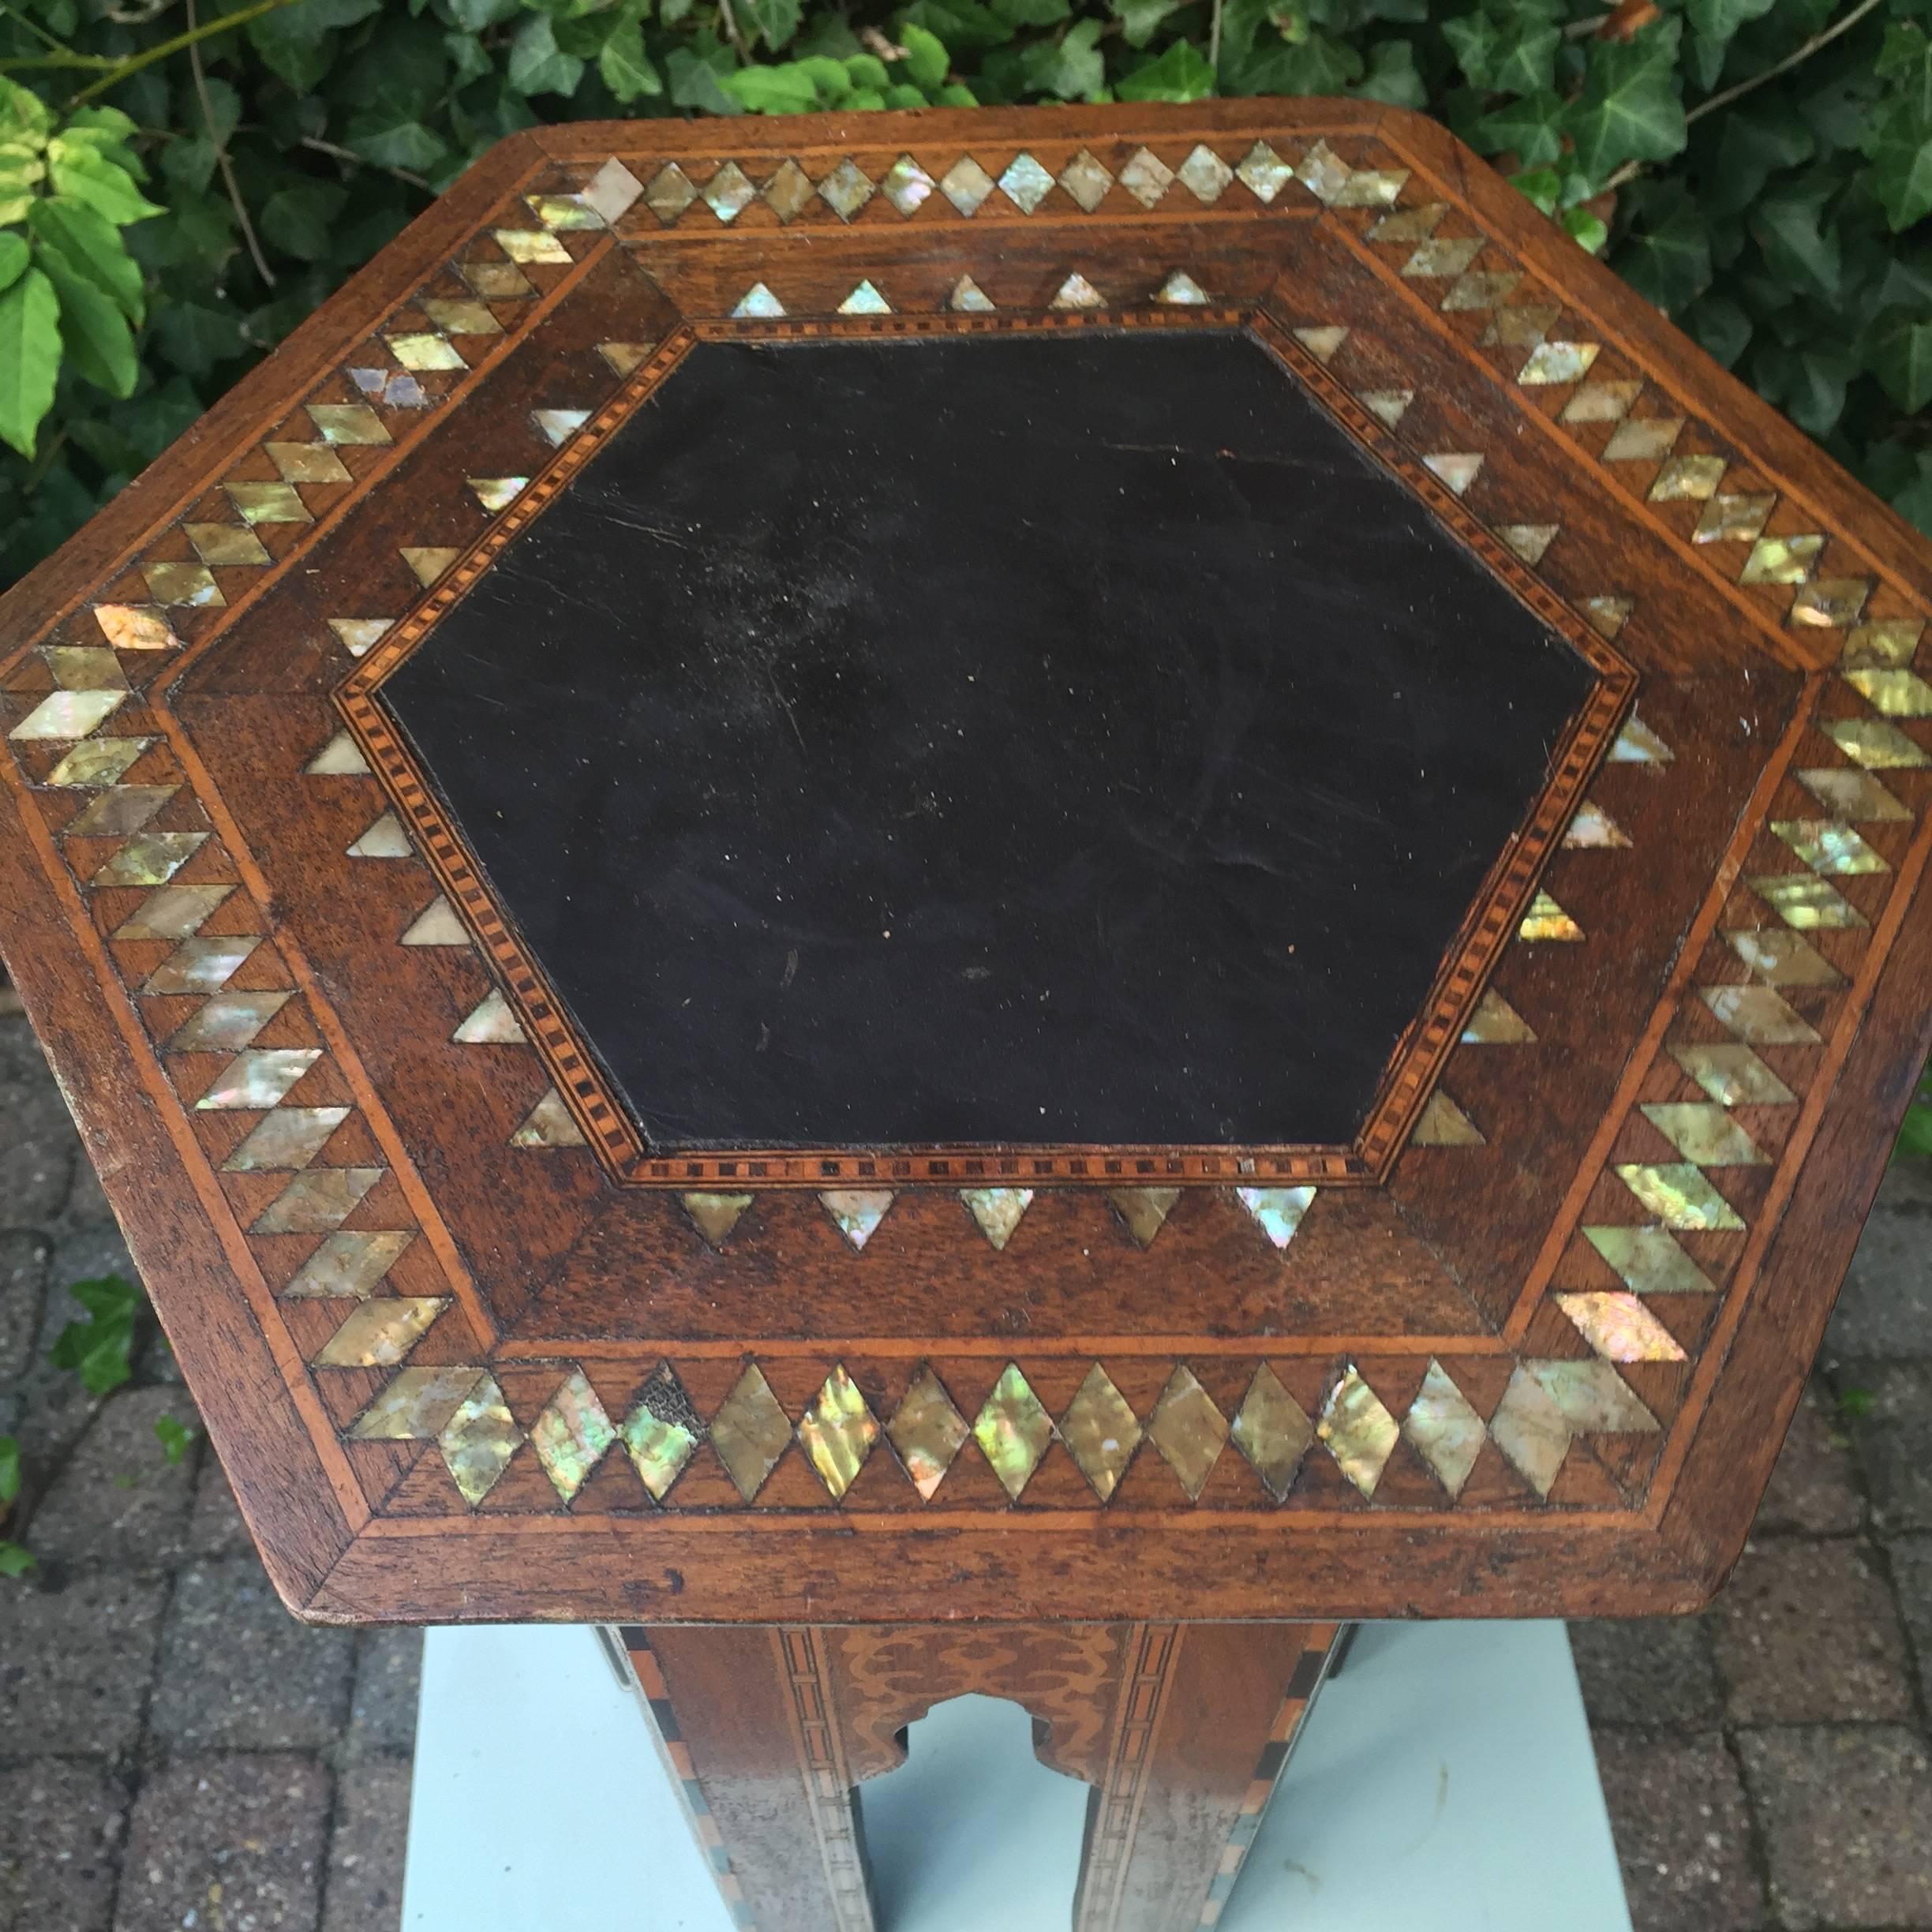 Beautiful antique Moorish table. 

Moorish antiques have always appealed to not just people with an Arab background. The beautiful shapes, the warm colors and the quality of the craftsmanship is respected and appreciated the world over. This fine